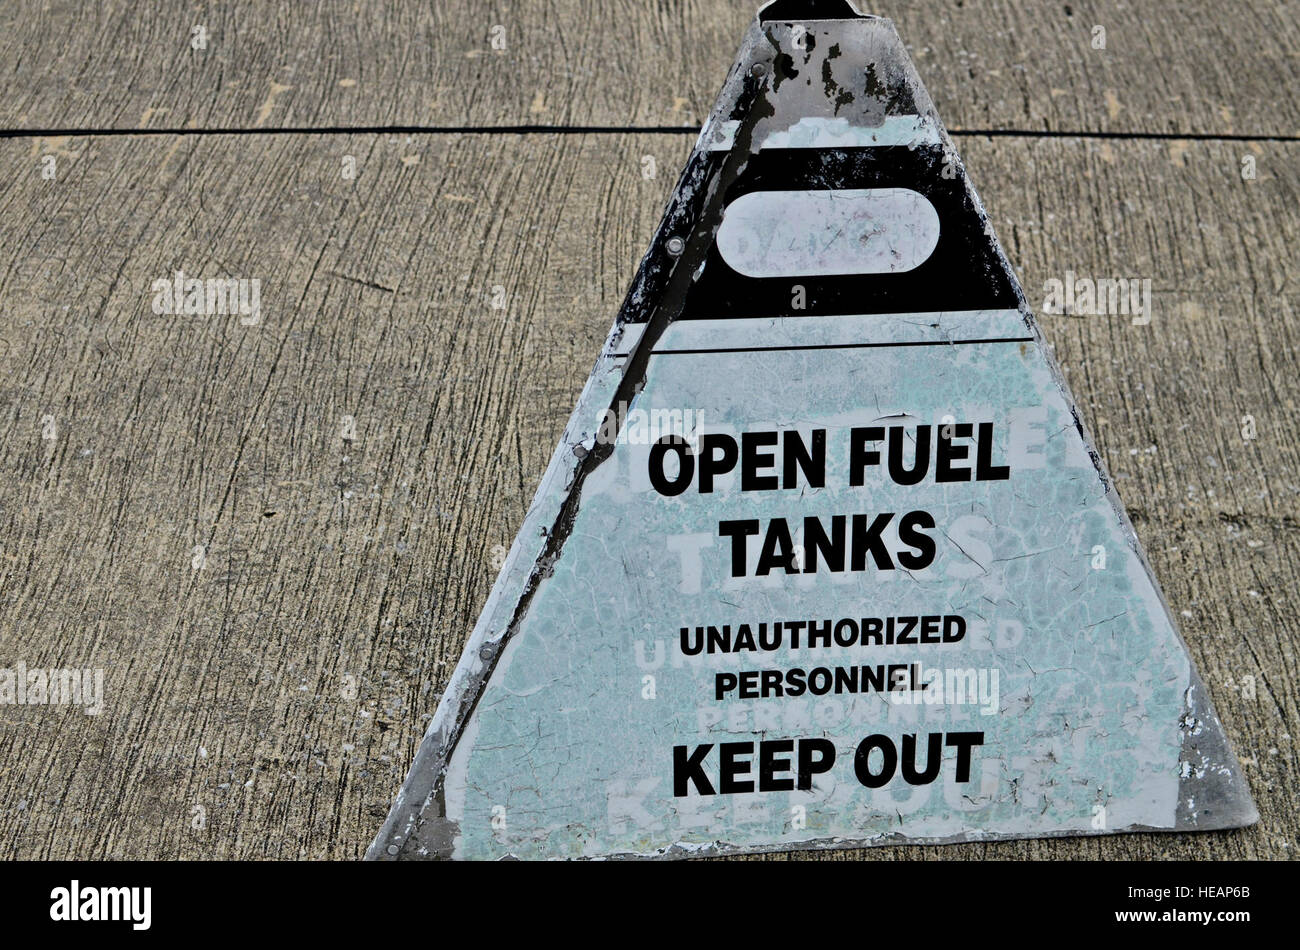 An open fuel tank sign sits outside the fuel cell hangar at Hurlburt Field, Fla., Feb. 21, 2014. During open tank maintenance, the area is cordoned off to create a controlled area free of spark producing and  non-intrinsically safe equipment.(U.S. Air Force Photo/Staff Sgt. John Bainter) Stock Photo